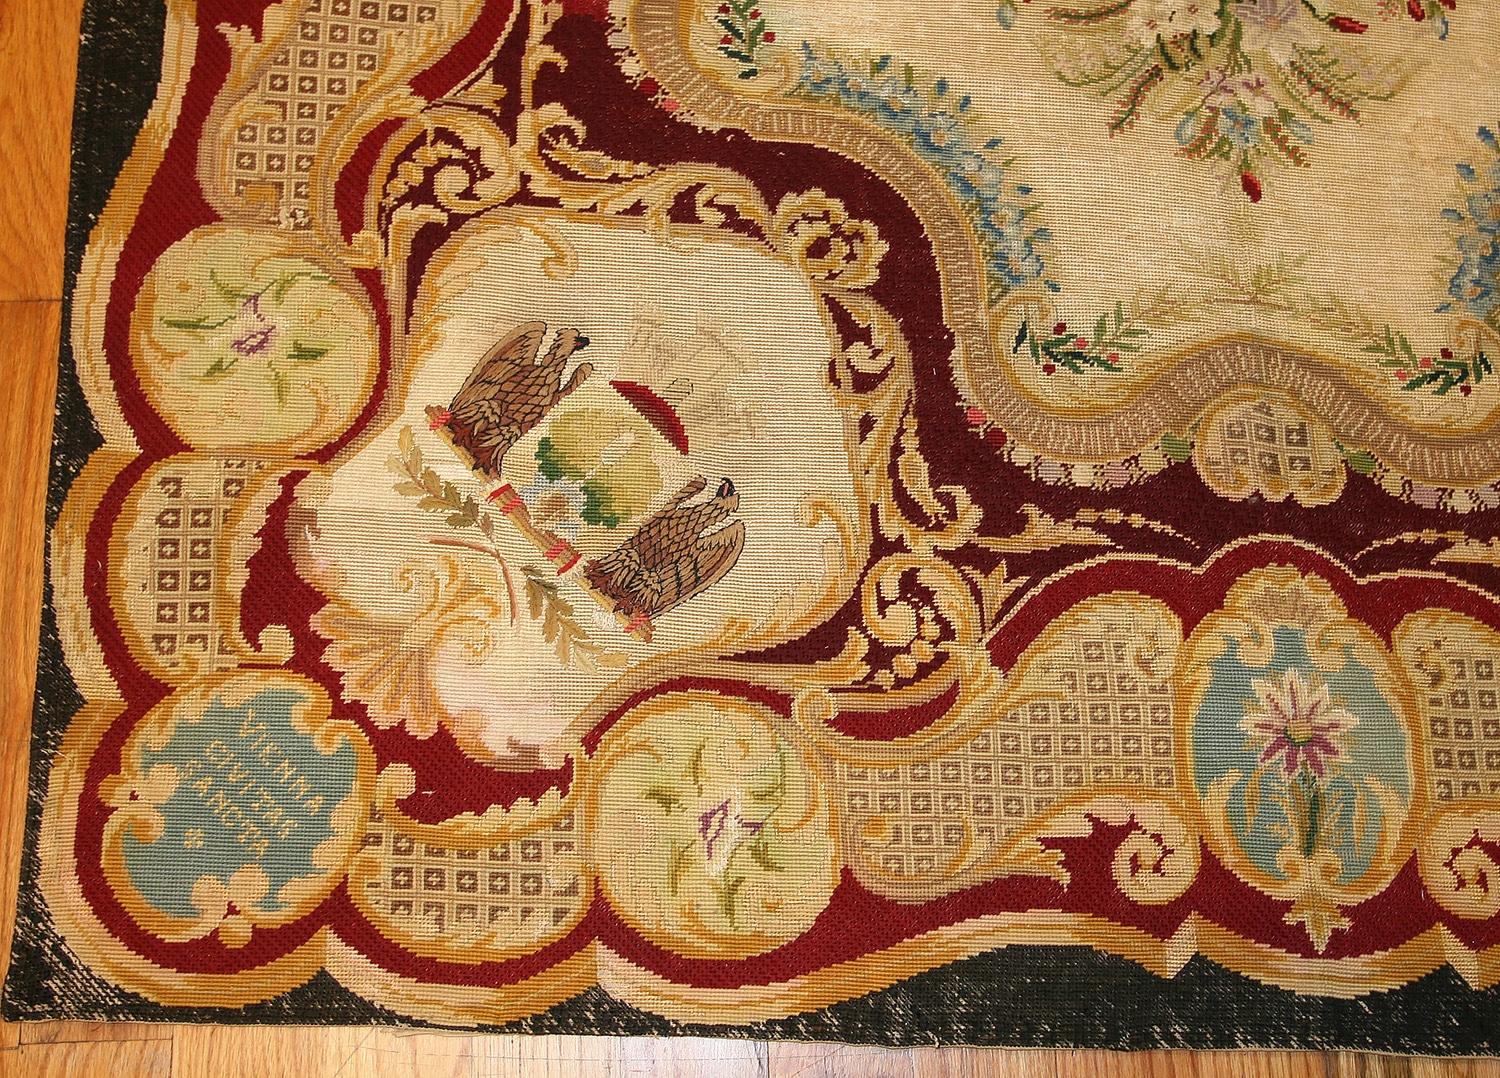 Antique Austro-Hungarian needlepoint, dated 1870-1874. Size: 5 ft x 6 ft (1.52 m x 1.83 m). 

